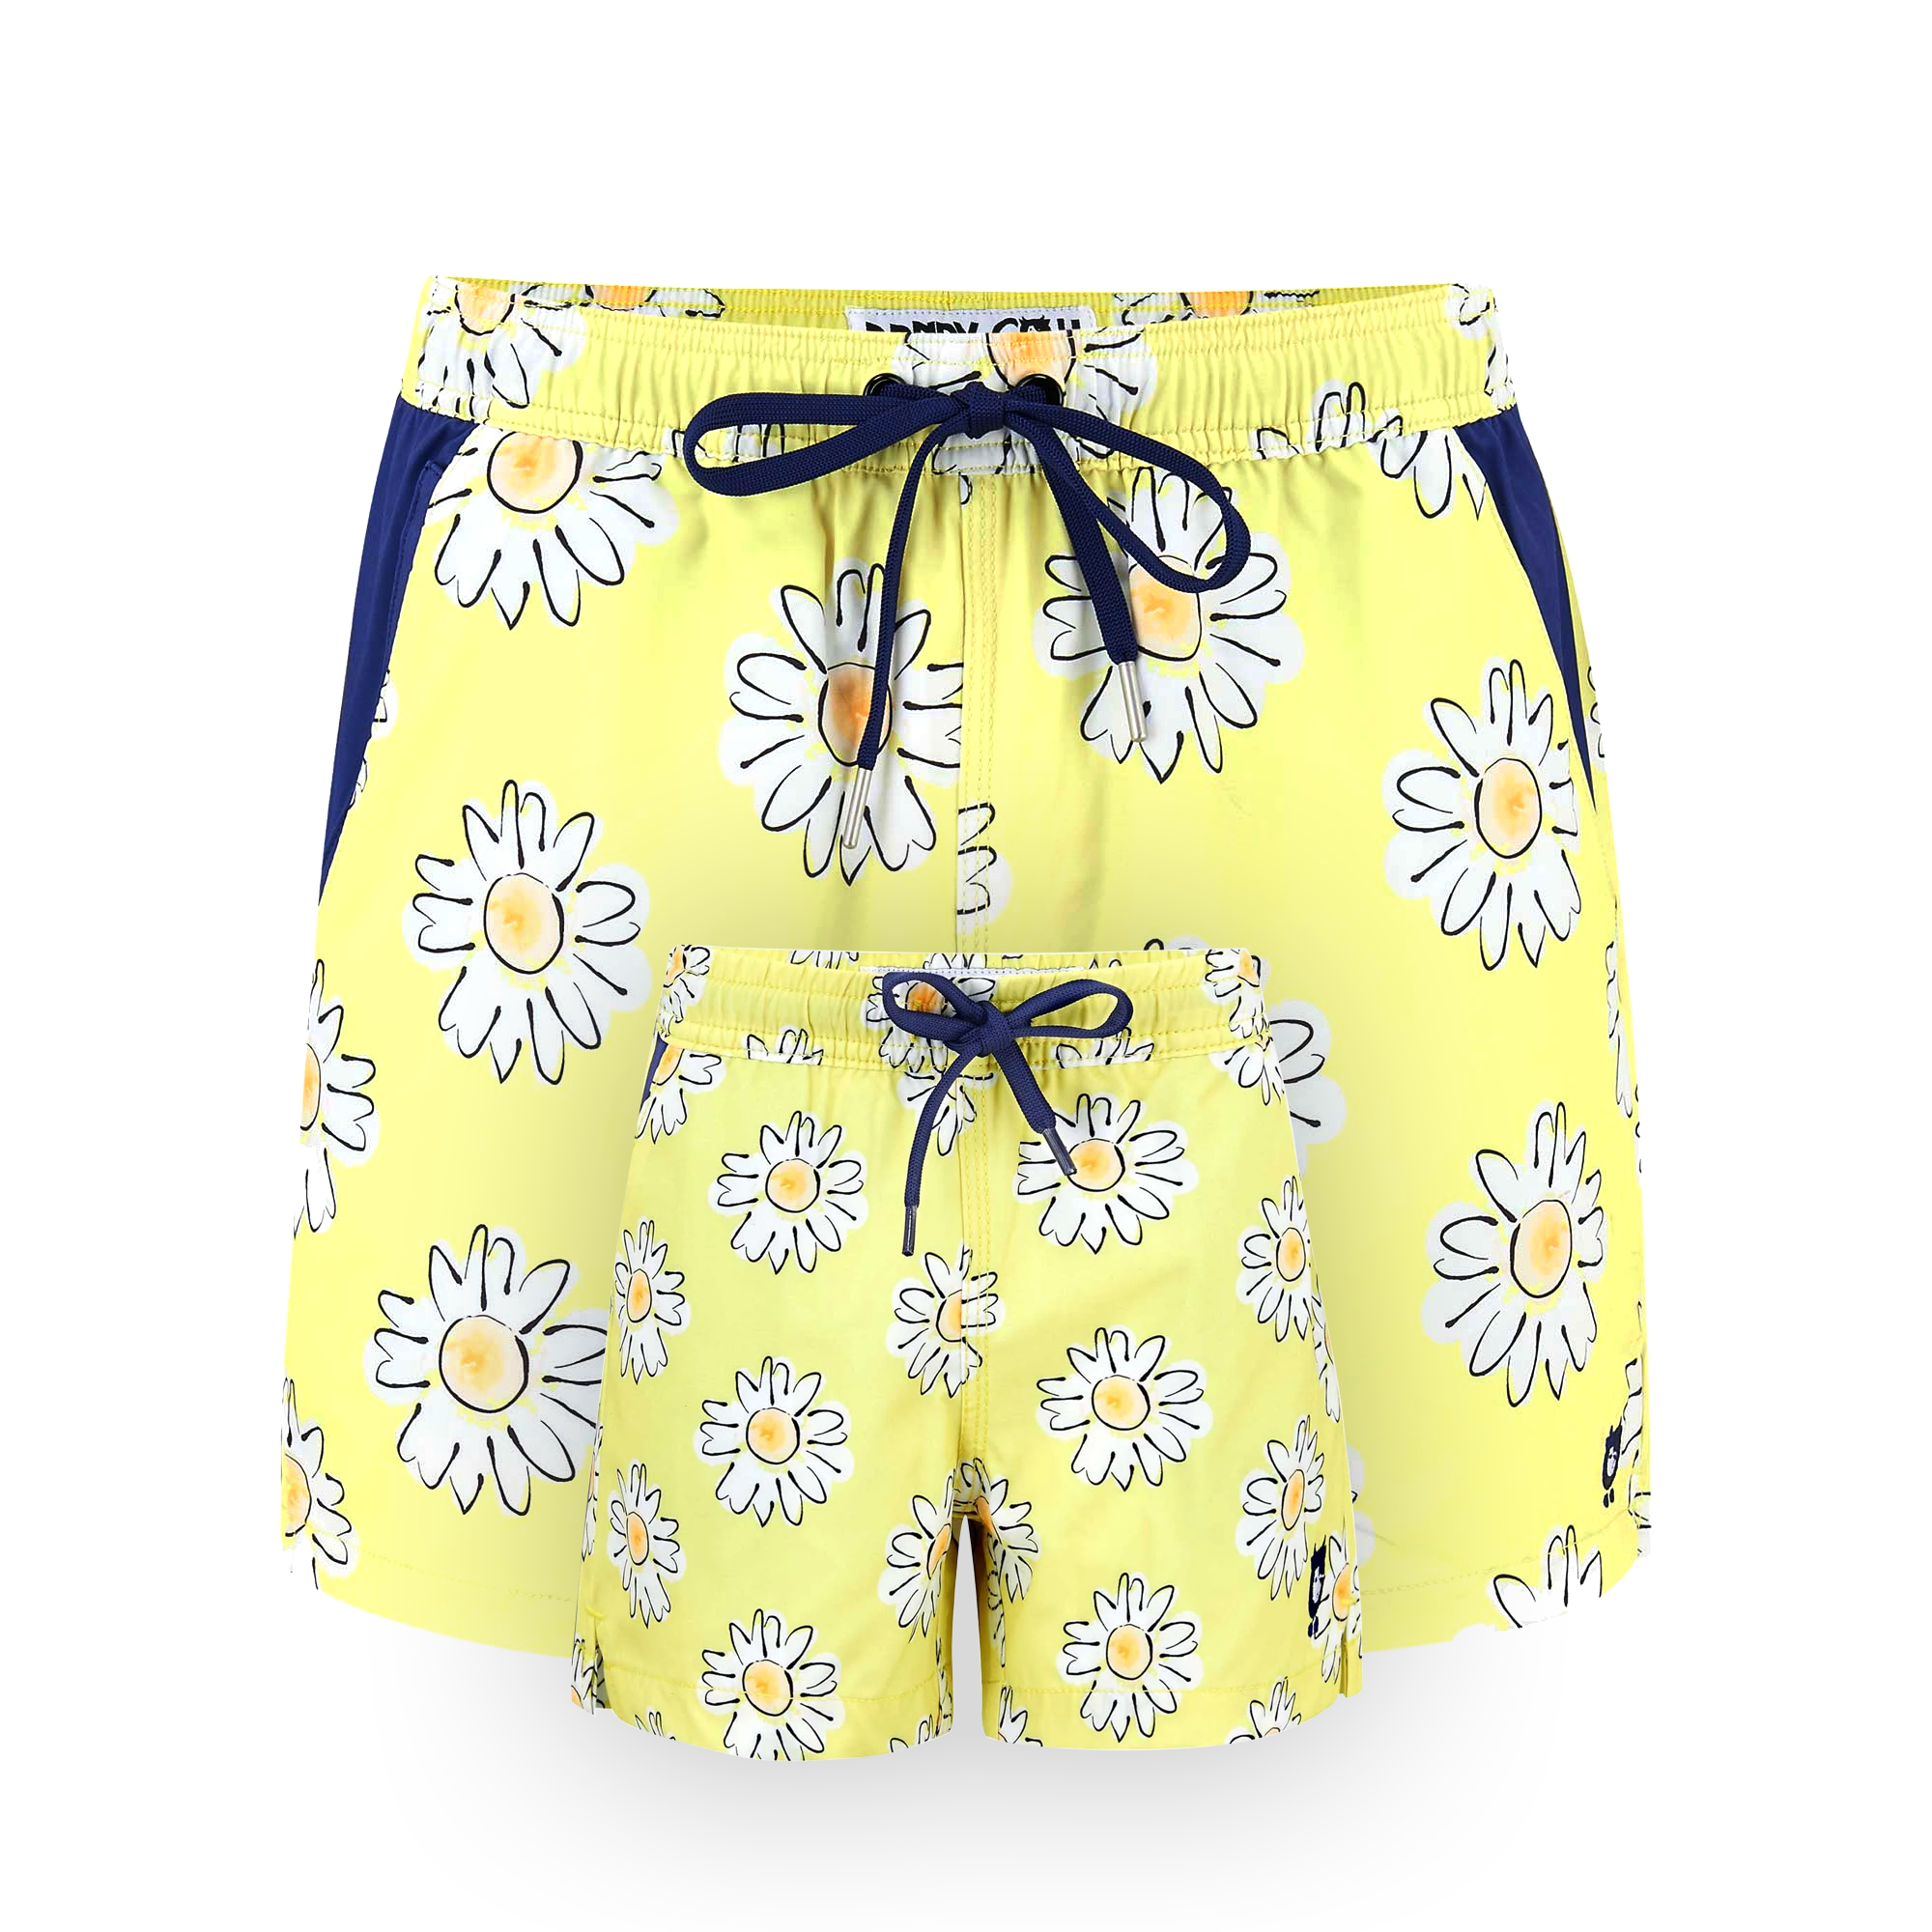 Daisies_7773a553-c113-4138-92d7-2ae81548cd08.png